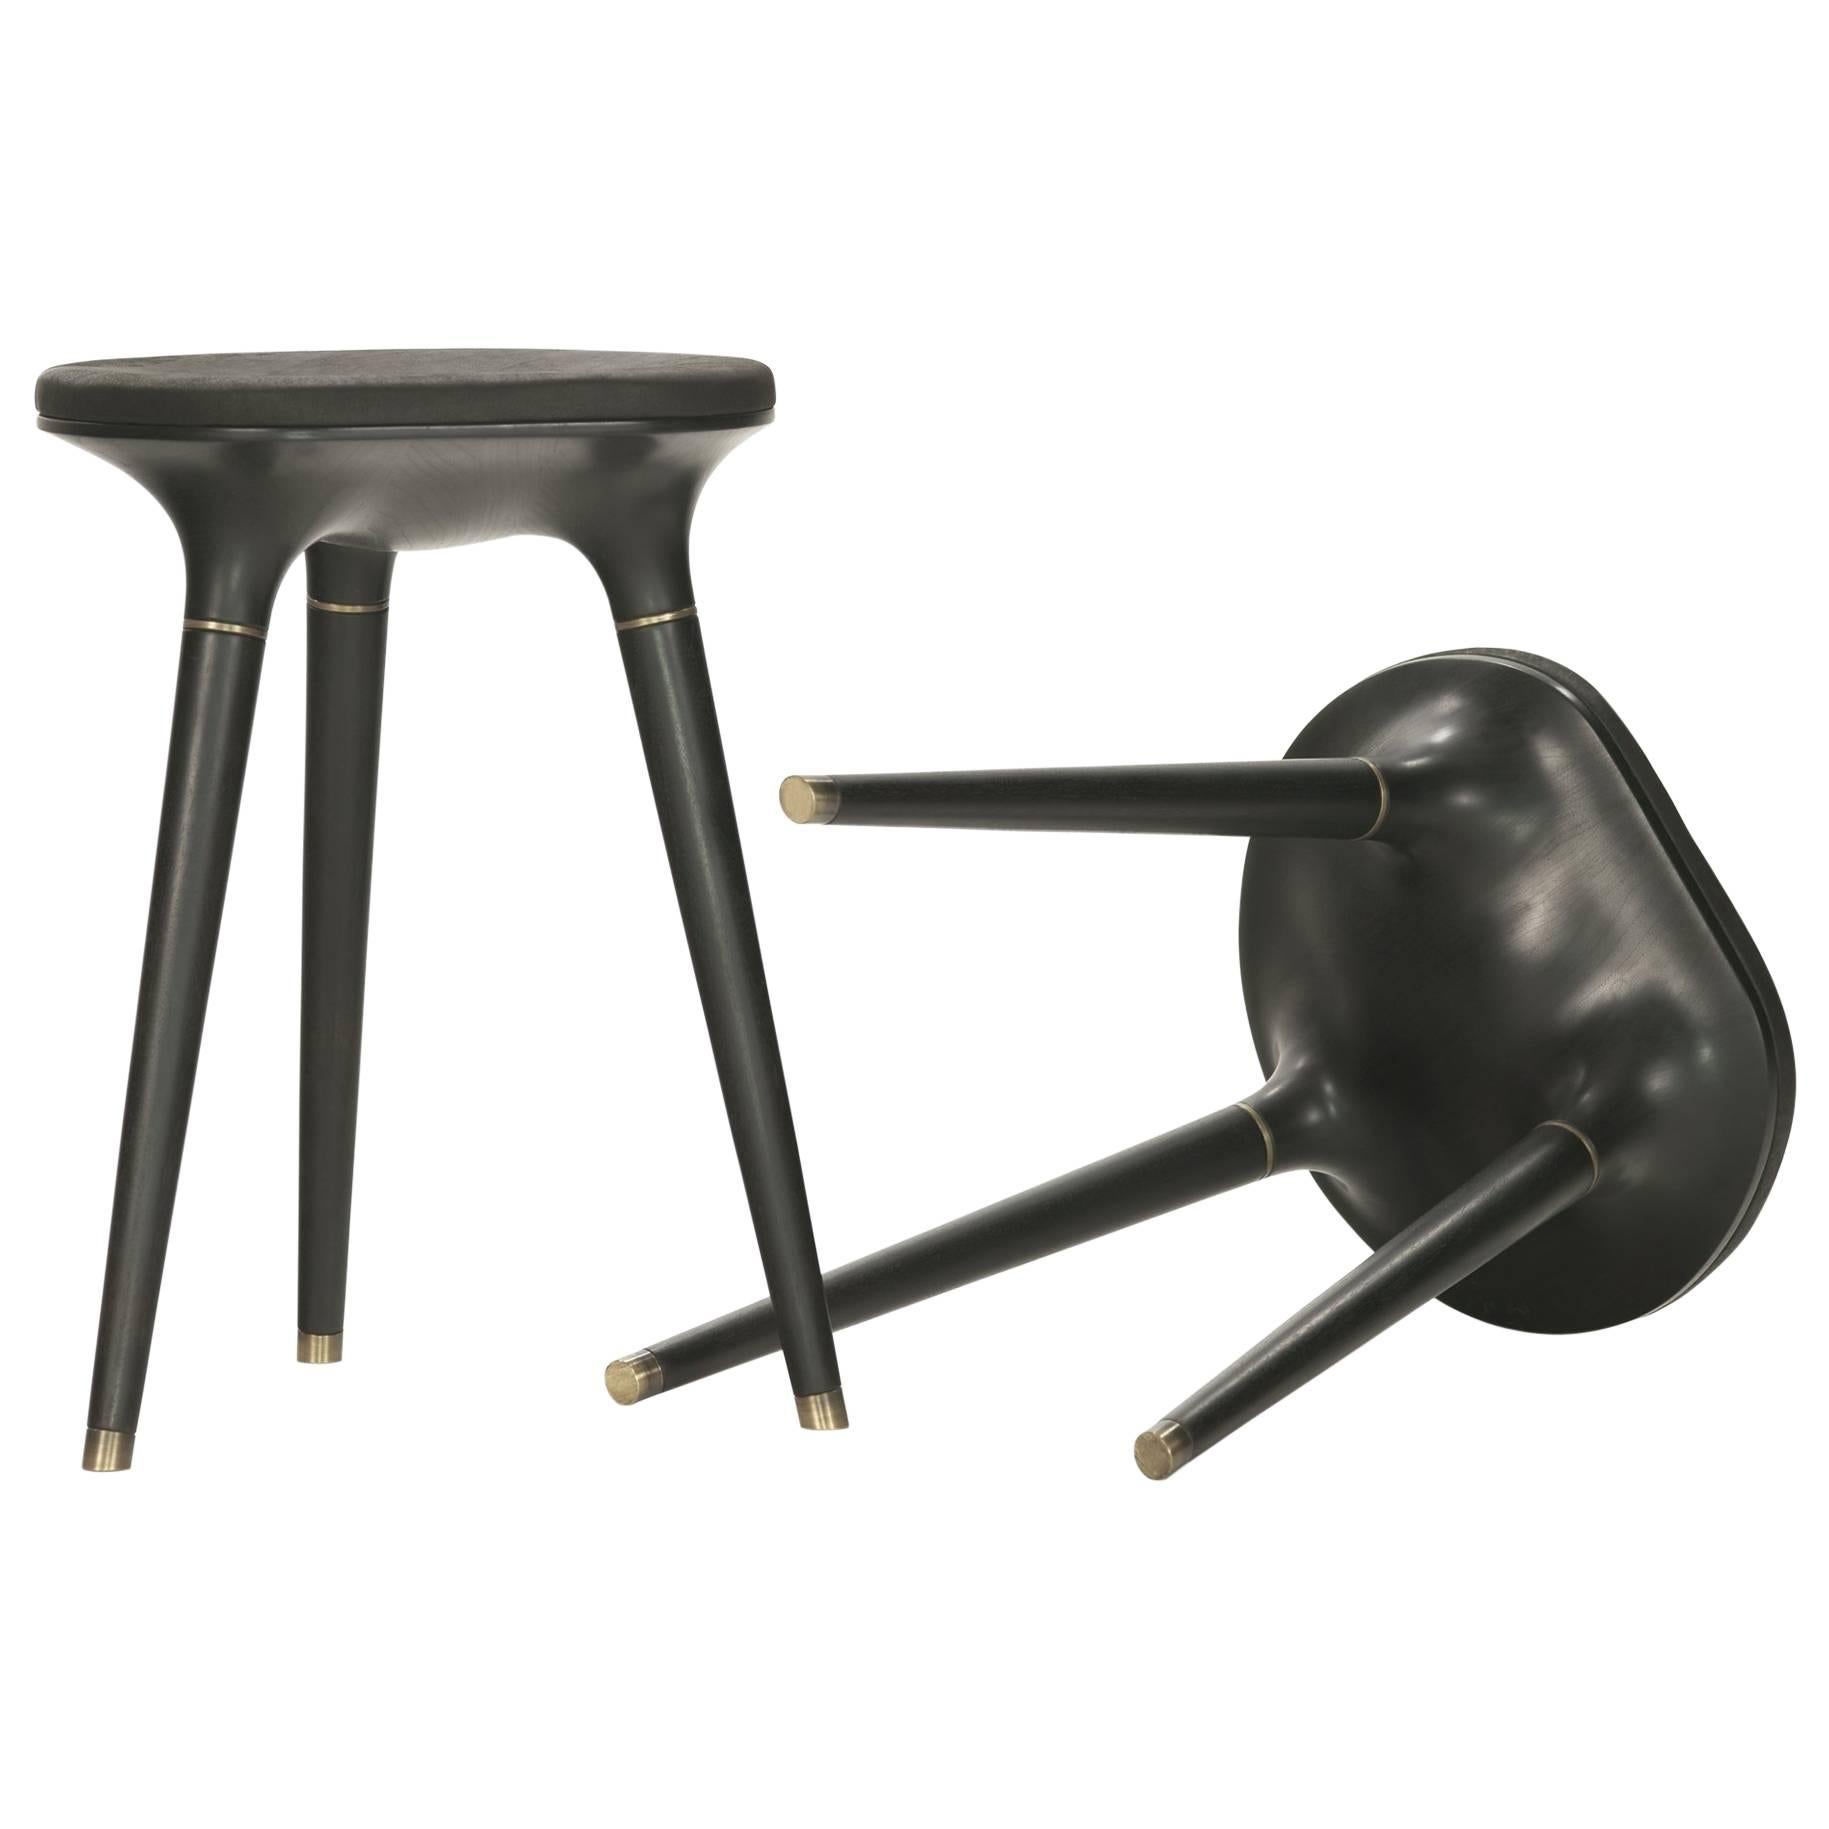 Contemporary Stool in Carved Walnut, Brass and Leather